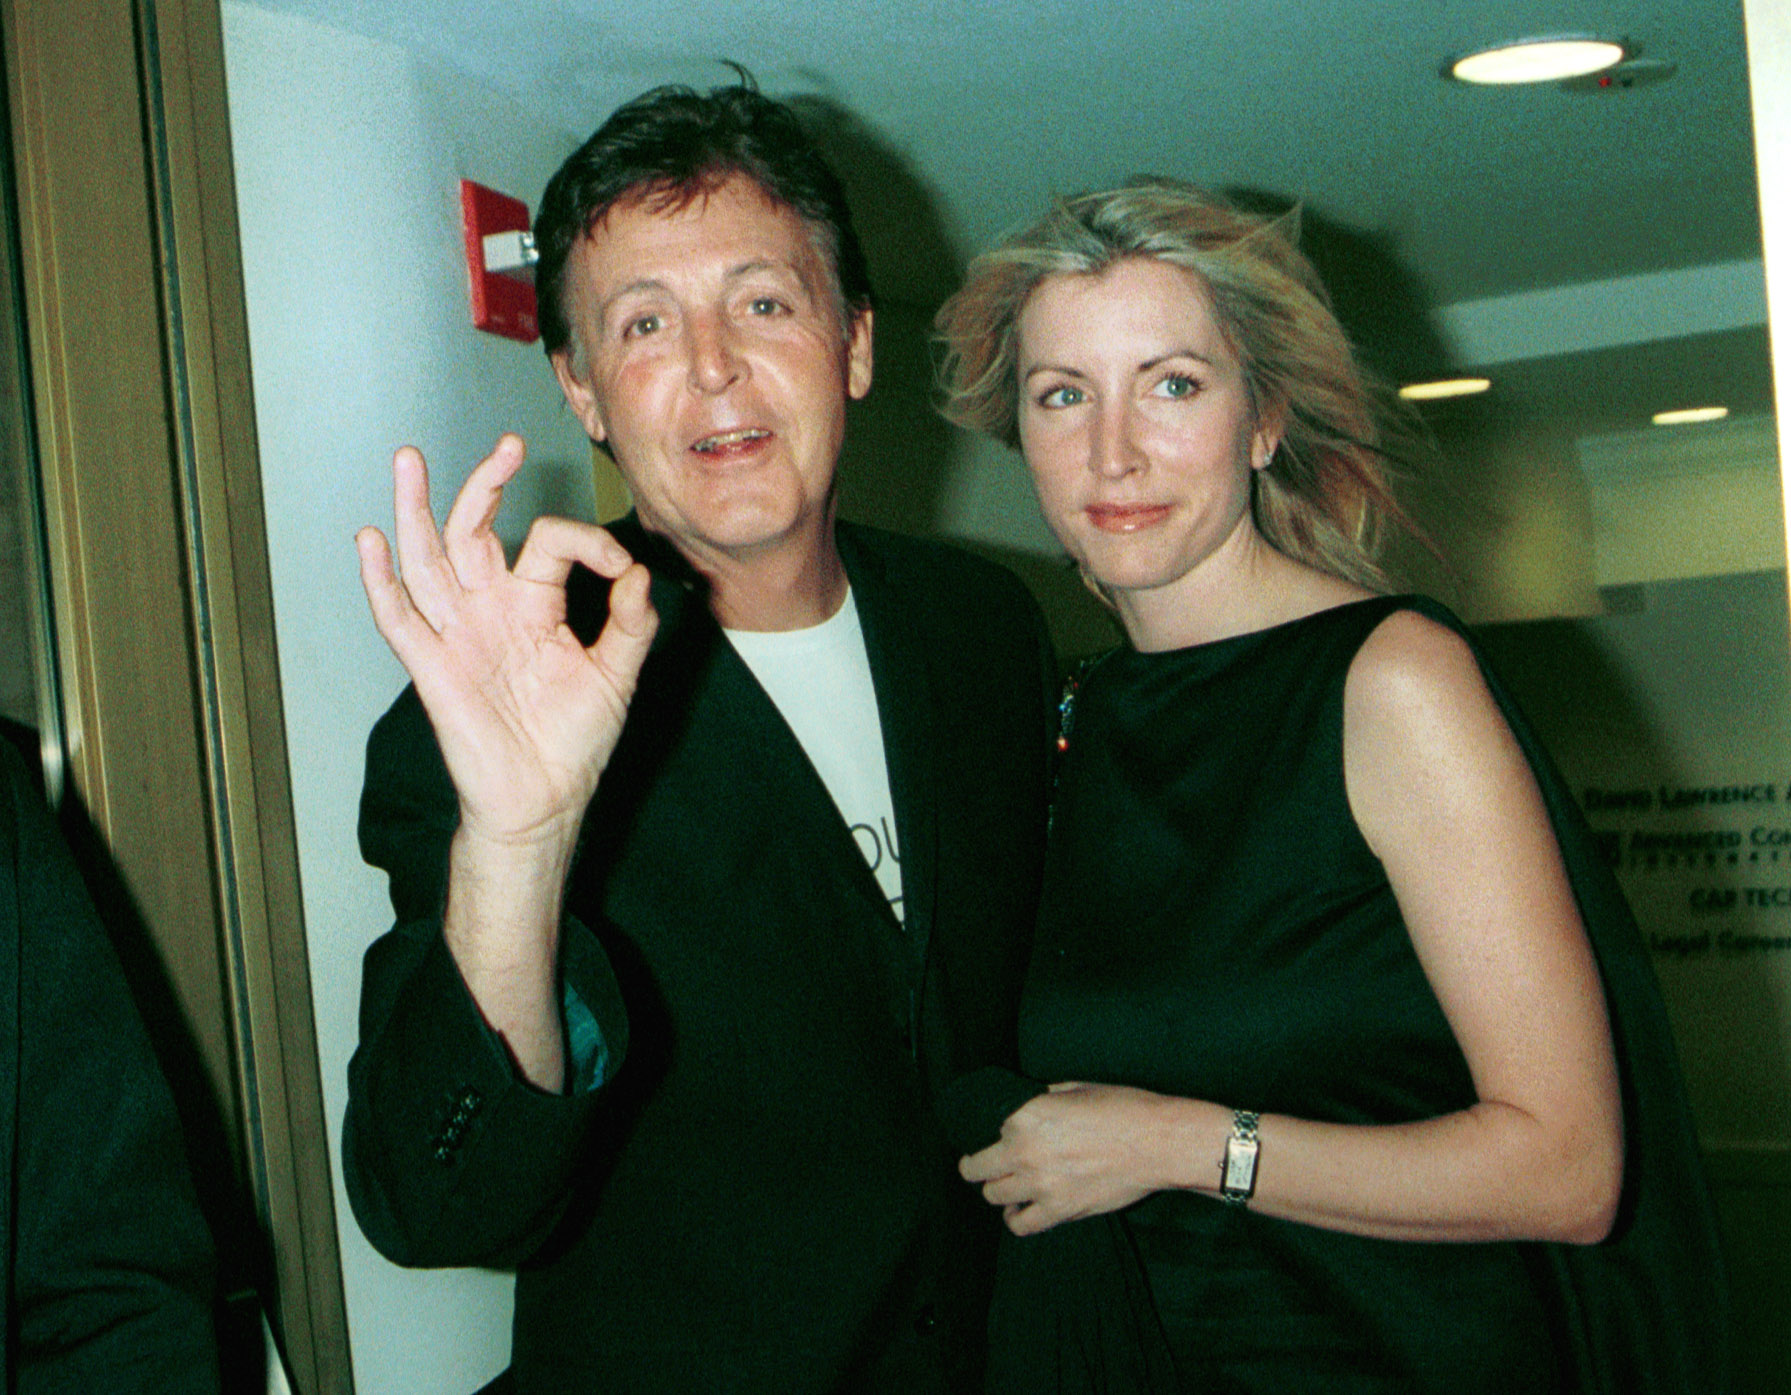 Paul McCartney and Heather Mills in New York in 2000 | Source: Getty Images